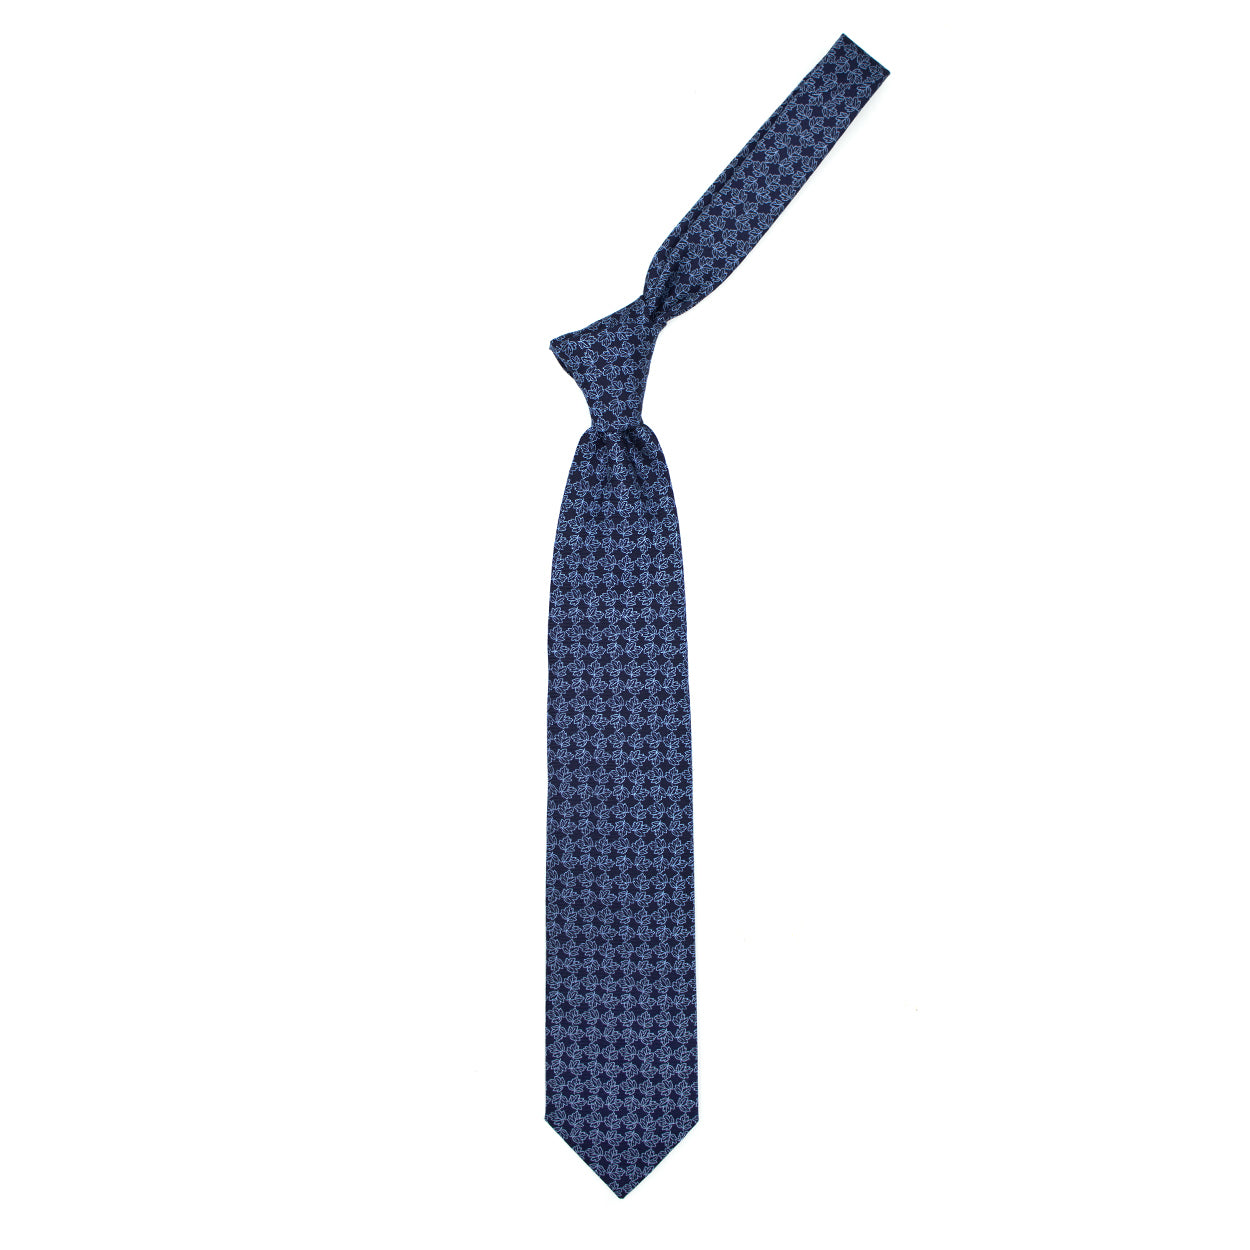 Blue tie with blue leaves